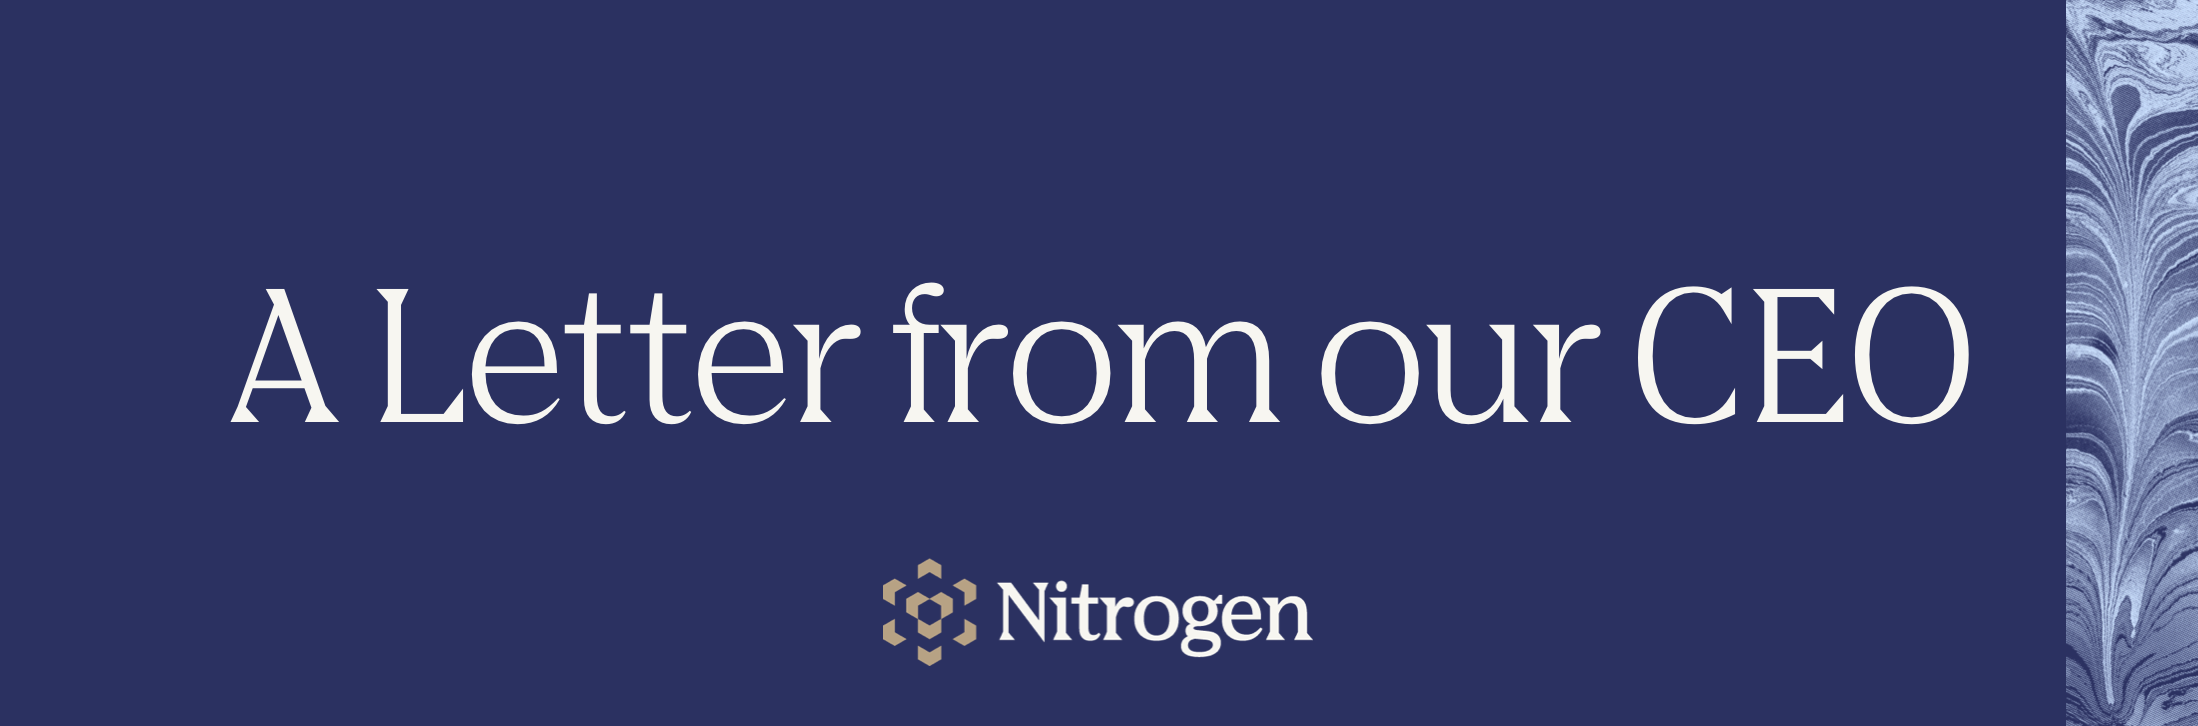 Nitrogen Wealth | A letter from our CEO